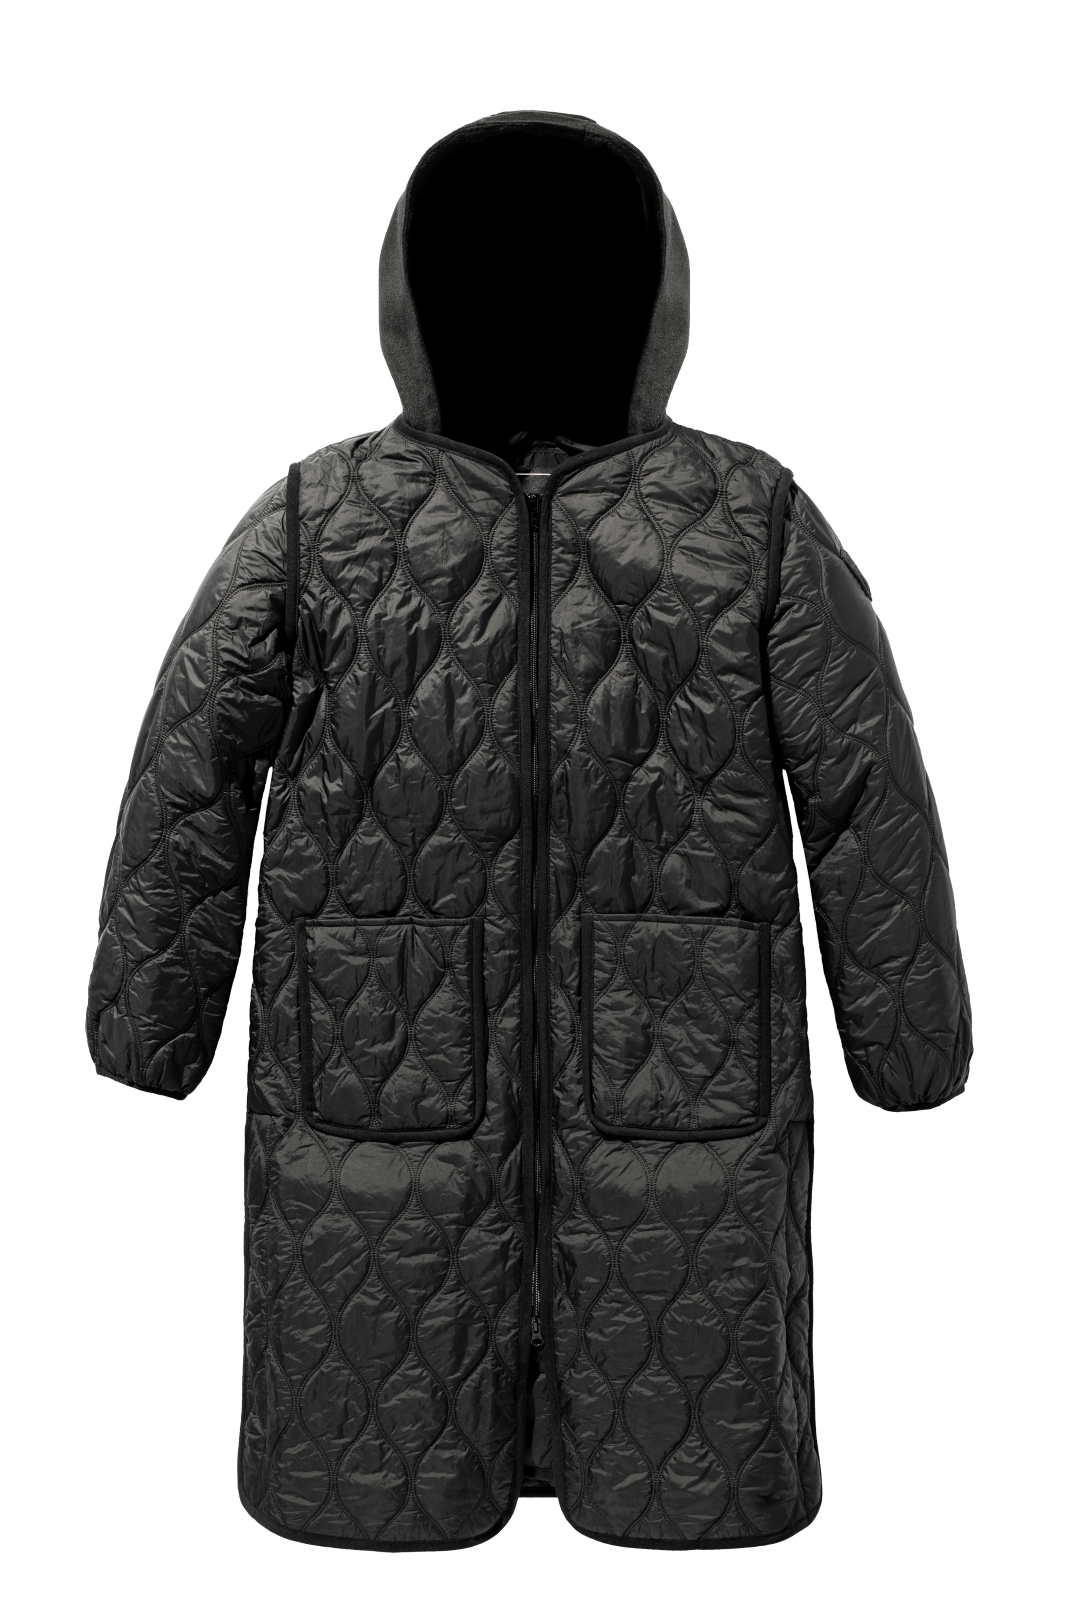 Suri Ladies Long Quilted Jacket in knee length, sustainable and environmentally friendly Primaloft Gold Insulation Active+, with removable fleece hood, two-way front zipper, diamond quilted body, in Black